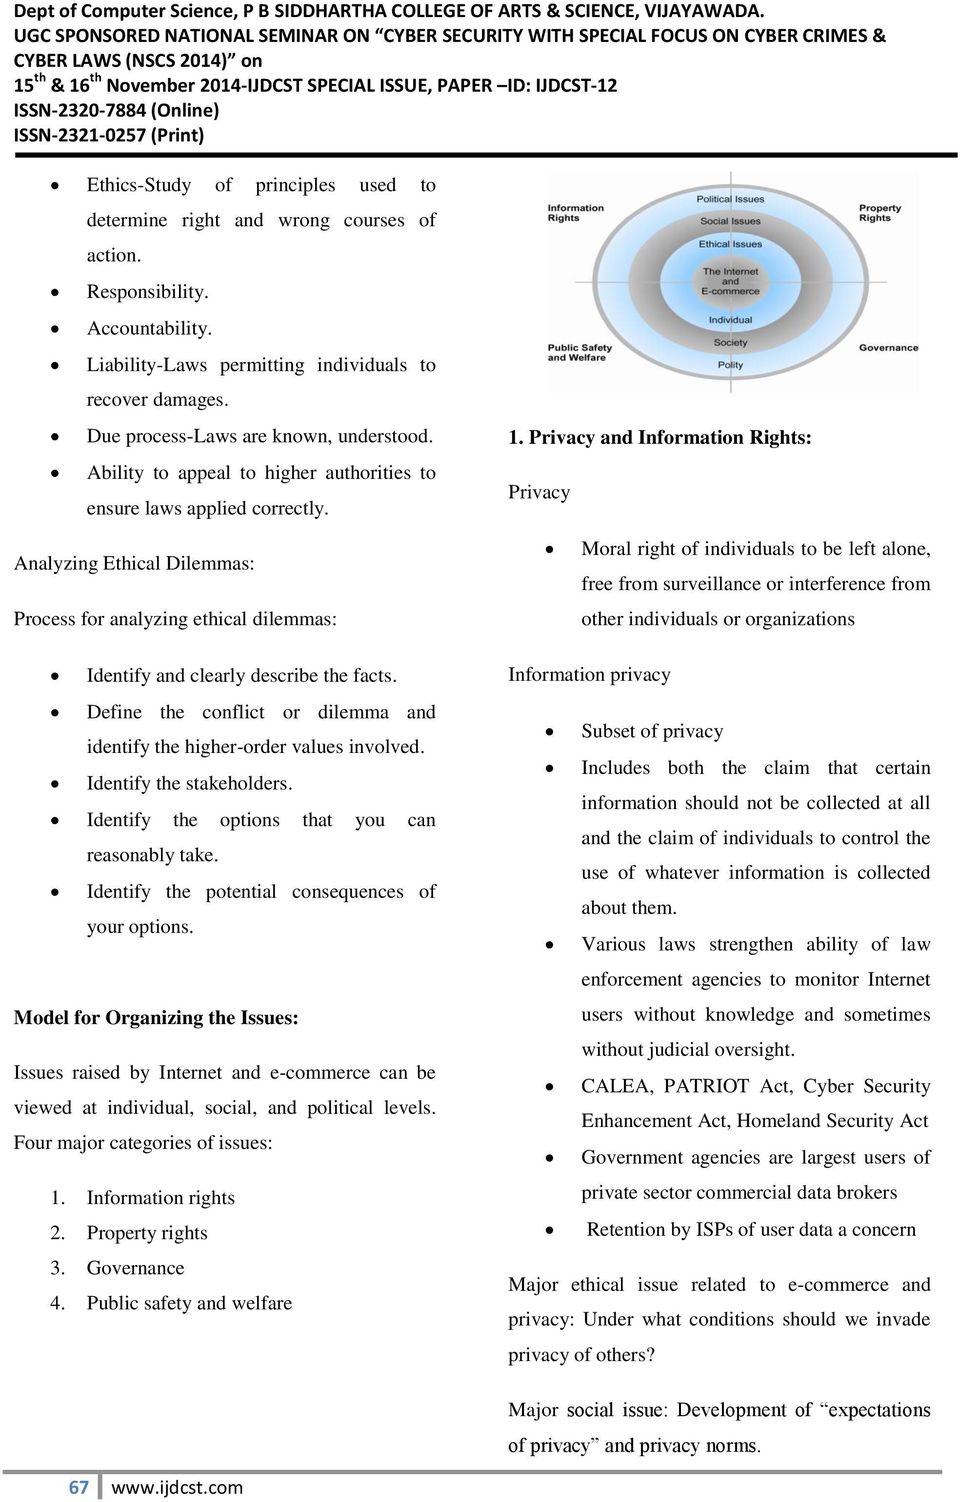 Proskauer On Privacy: A Guide To Privacy And Data Security Law In The Information Age (2nd Edition)l carlind page_2